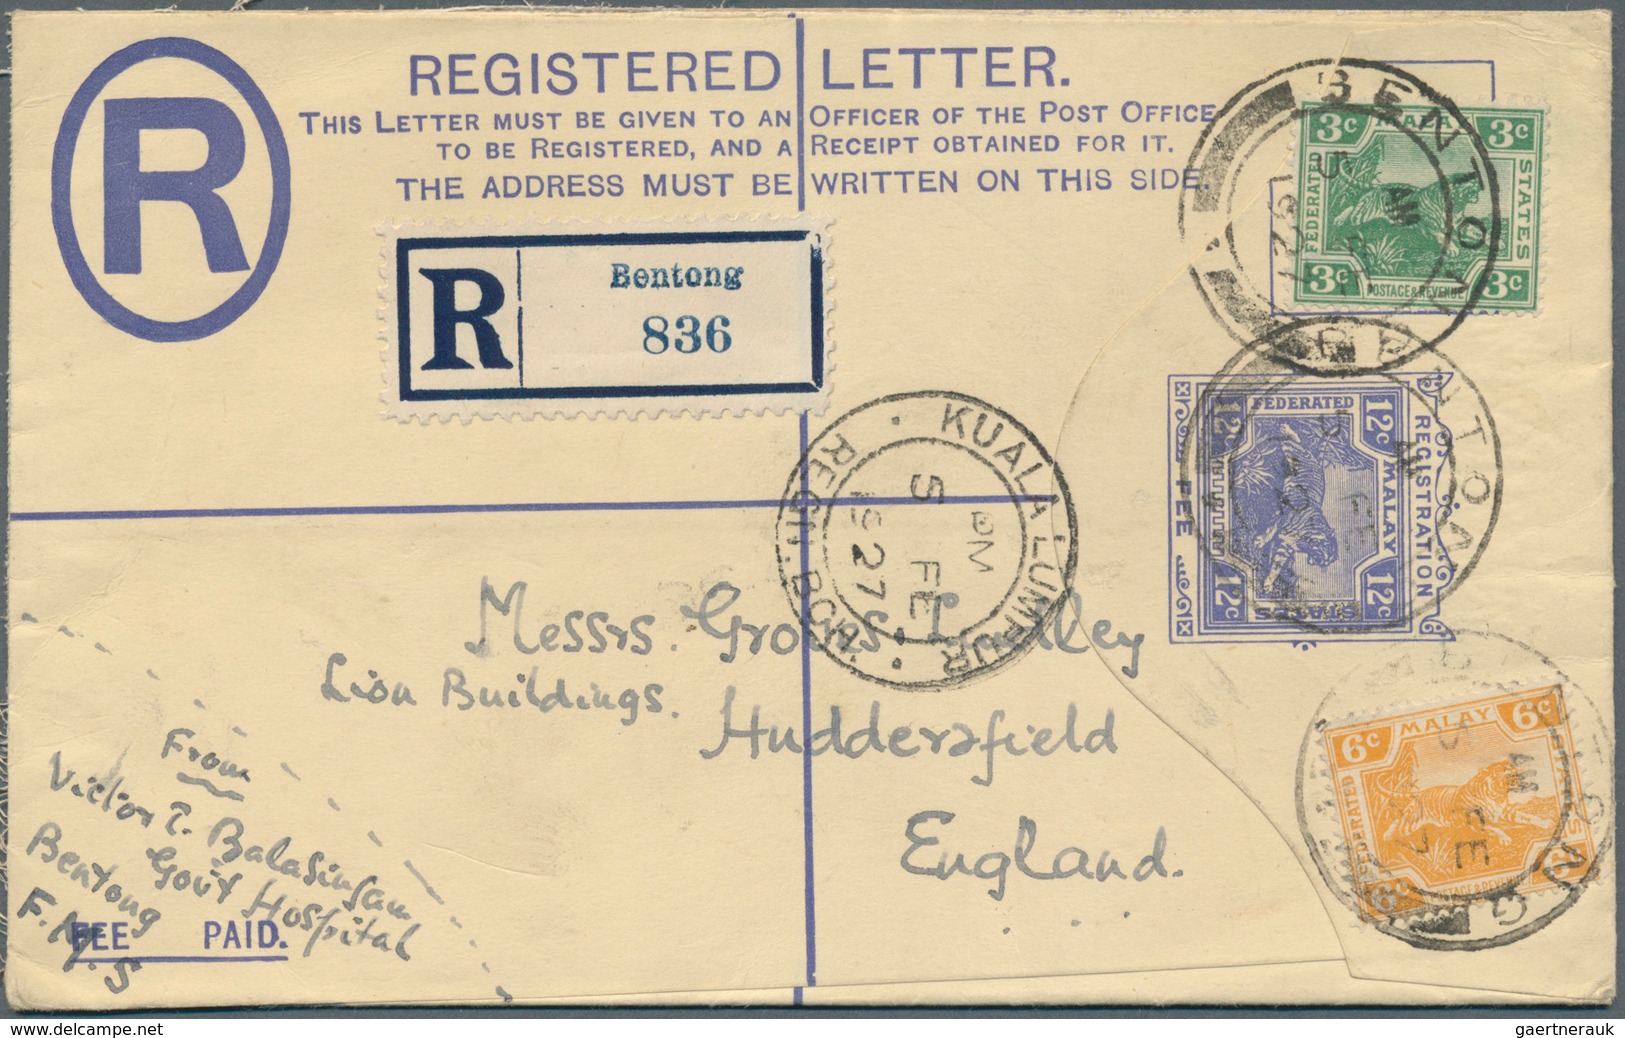 06254 Malaiische Staaten - Pahang: 1927 (5/2): Bentong, FMS 15c Registered Envelope To England, Uprated Wi - Pahang